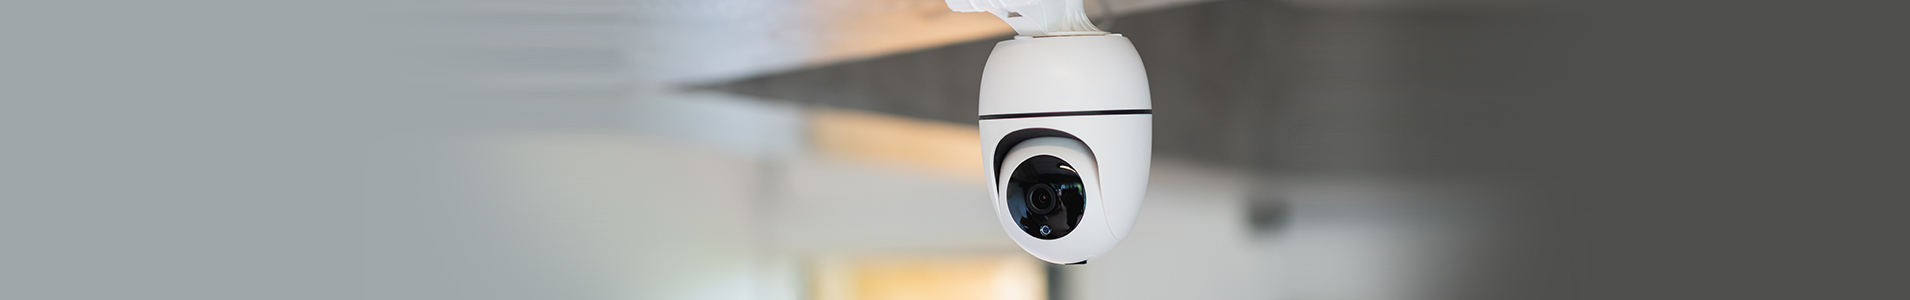 Why Should You Install CCTV Security Camera Systems In Commercial Space